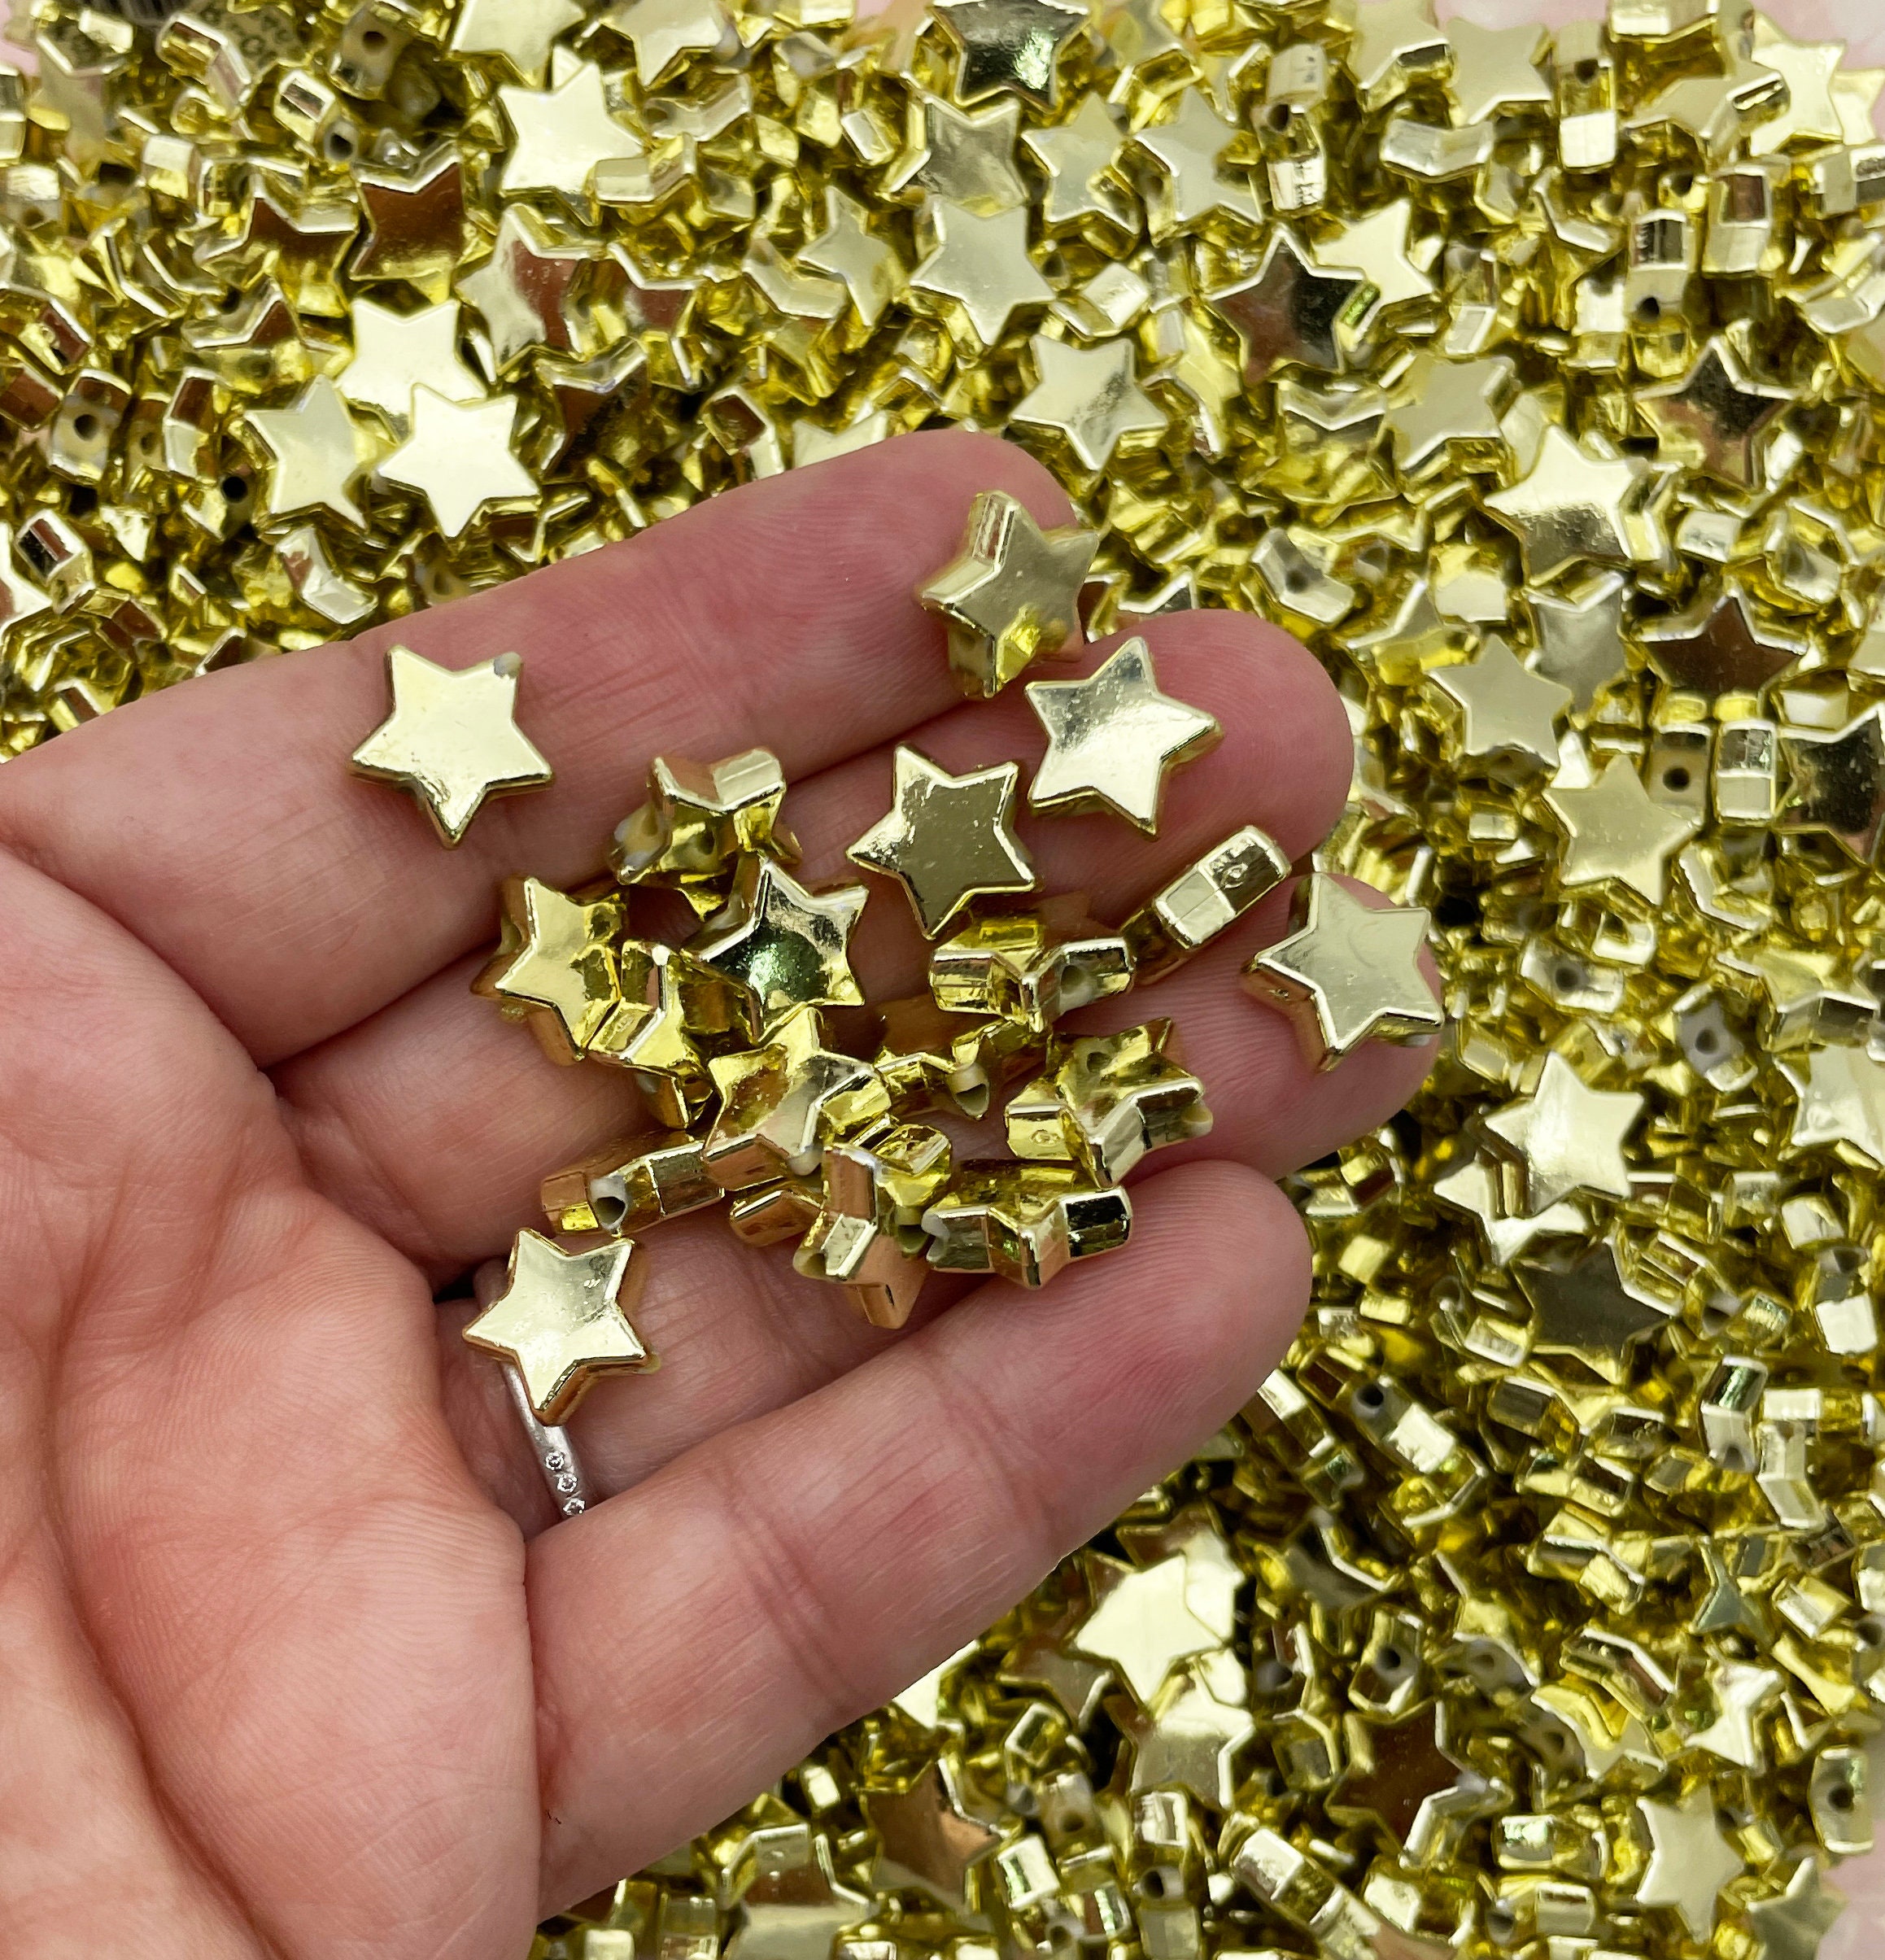 Clearance Resin Star Charms with Star Confetti | Glitter Star Pendant | Kawaii Decoden Pieces | Decora Kei Jewelry Supplies | Phone Case Decoration (